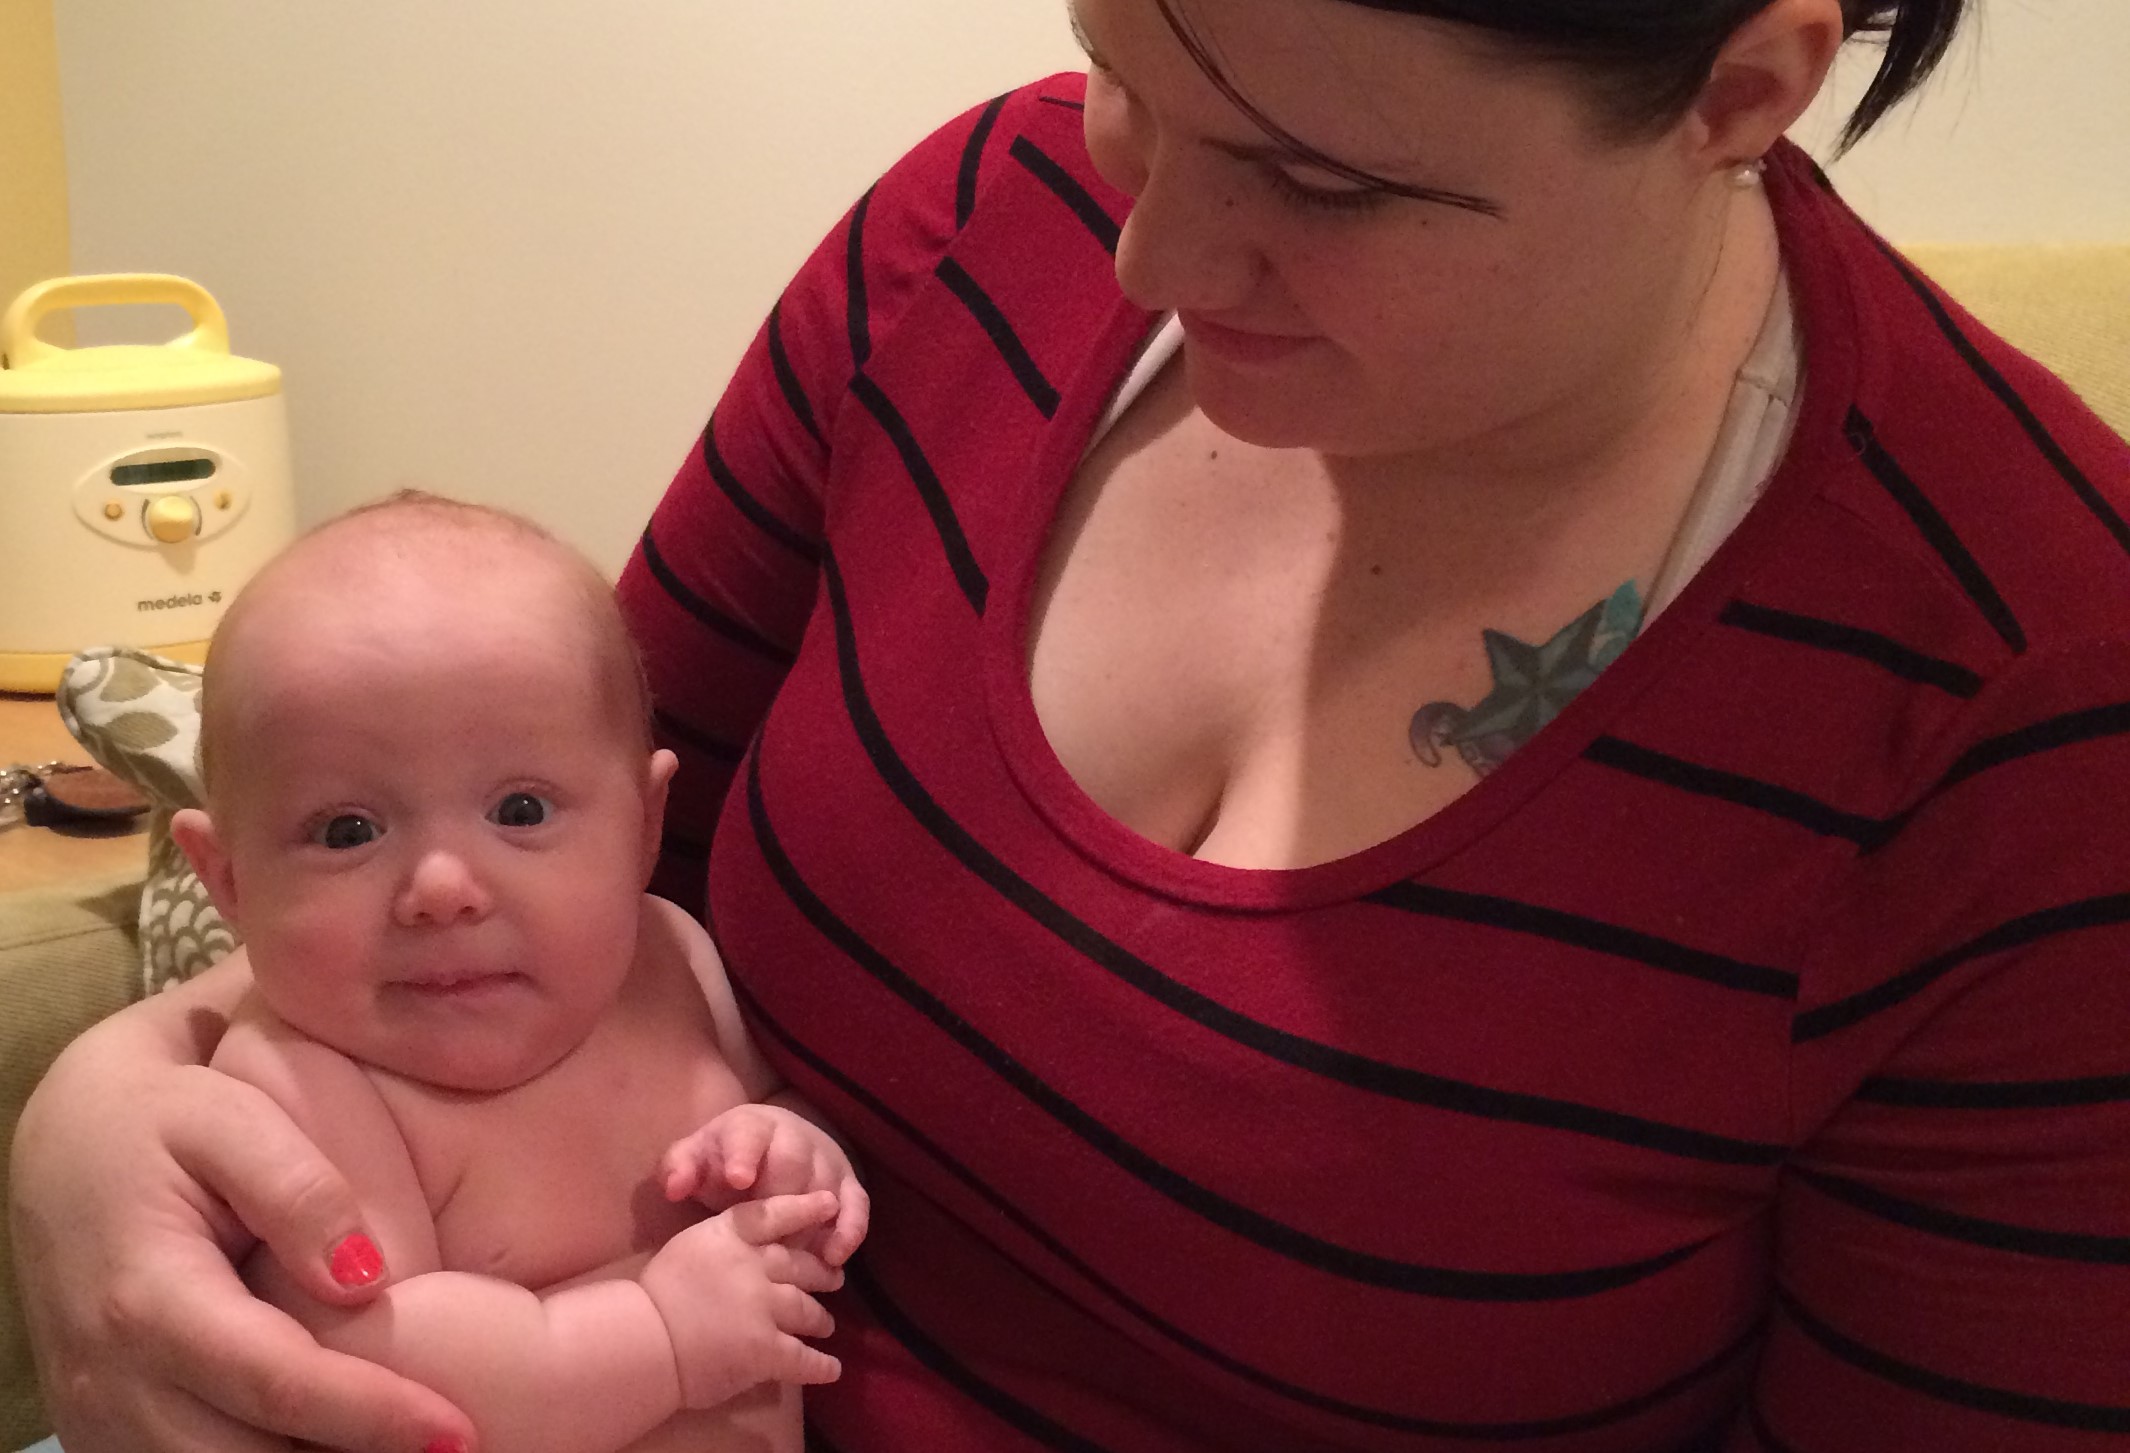 Brunette woman in red striped shirt holding a chubby baby wearing a diaper. She is looking at her baby and the baby is looking at the camera.